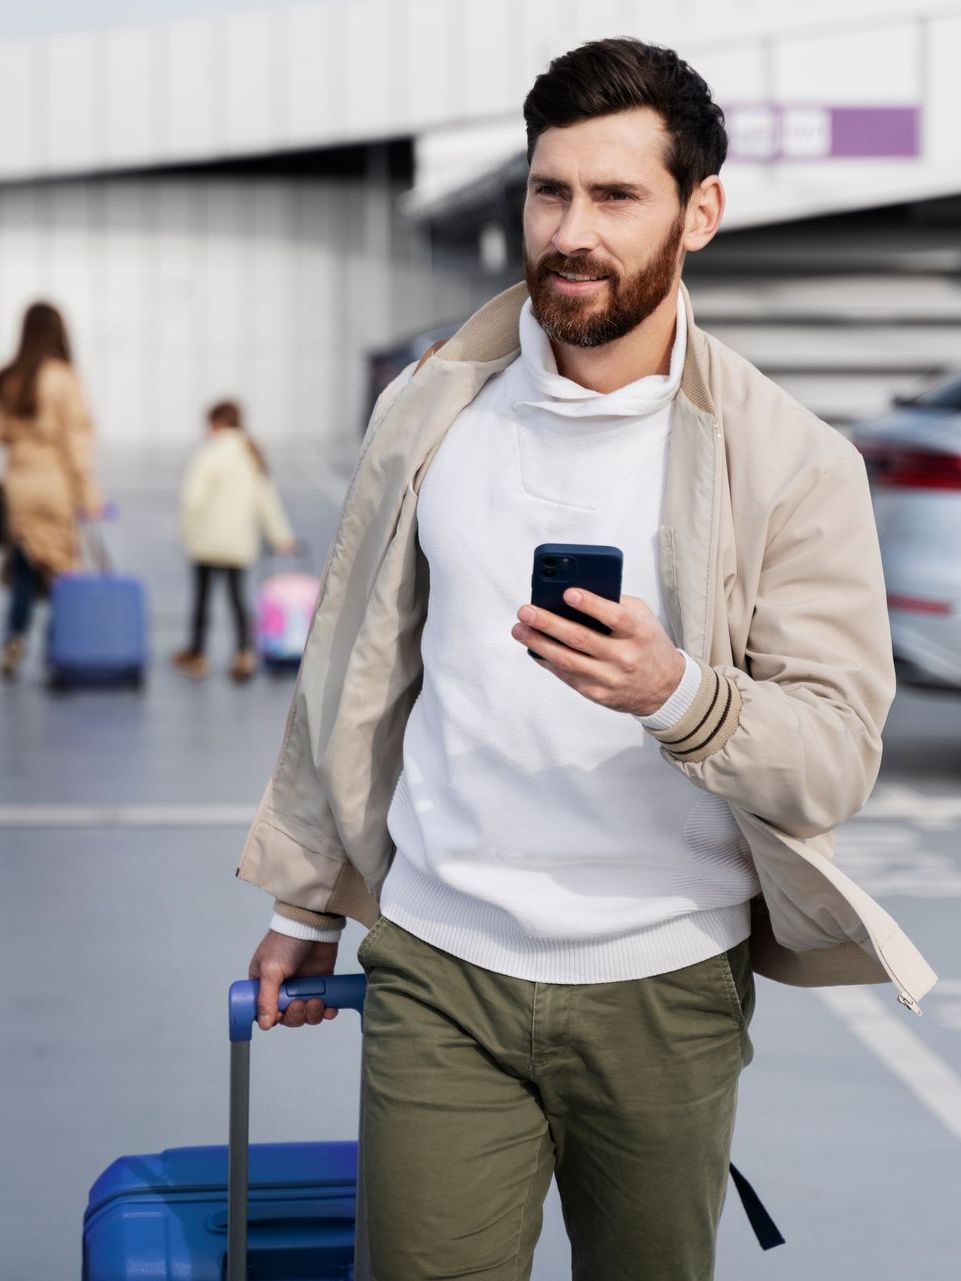 A man is walking with a suitcase and looking at his phone.